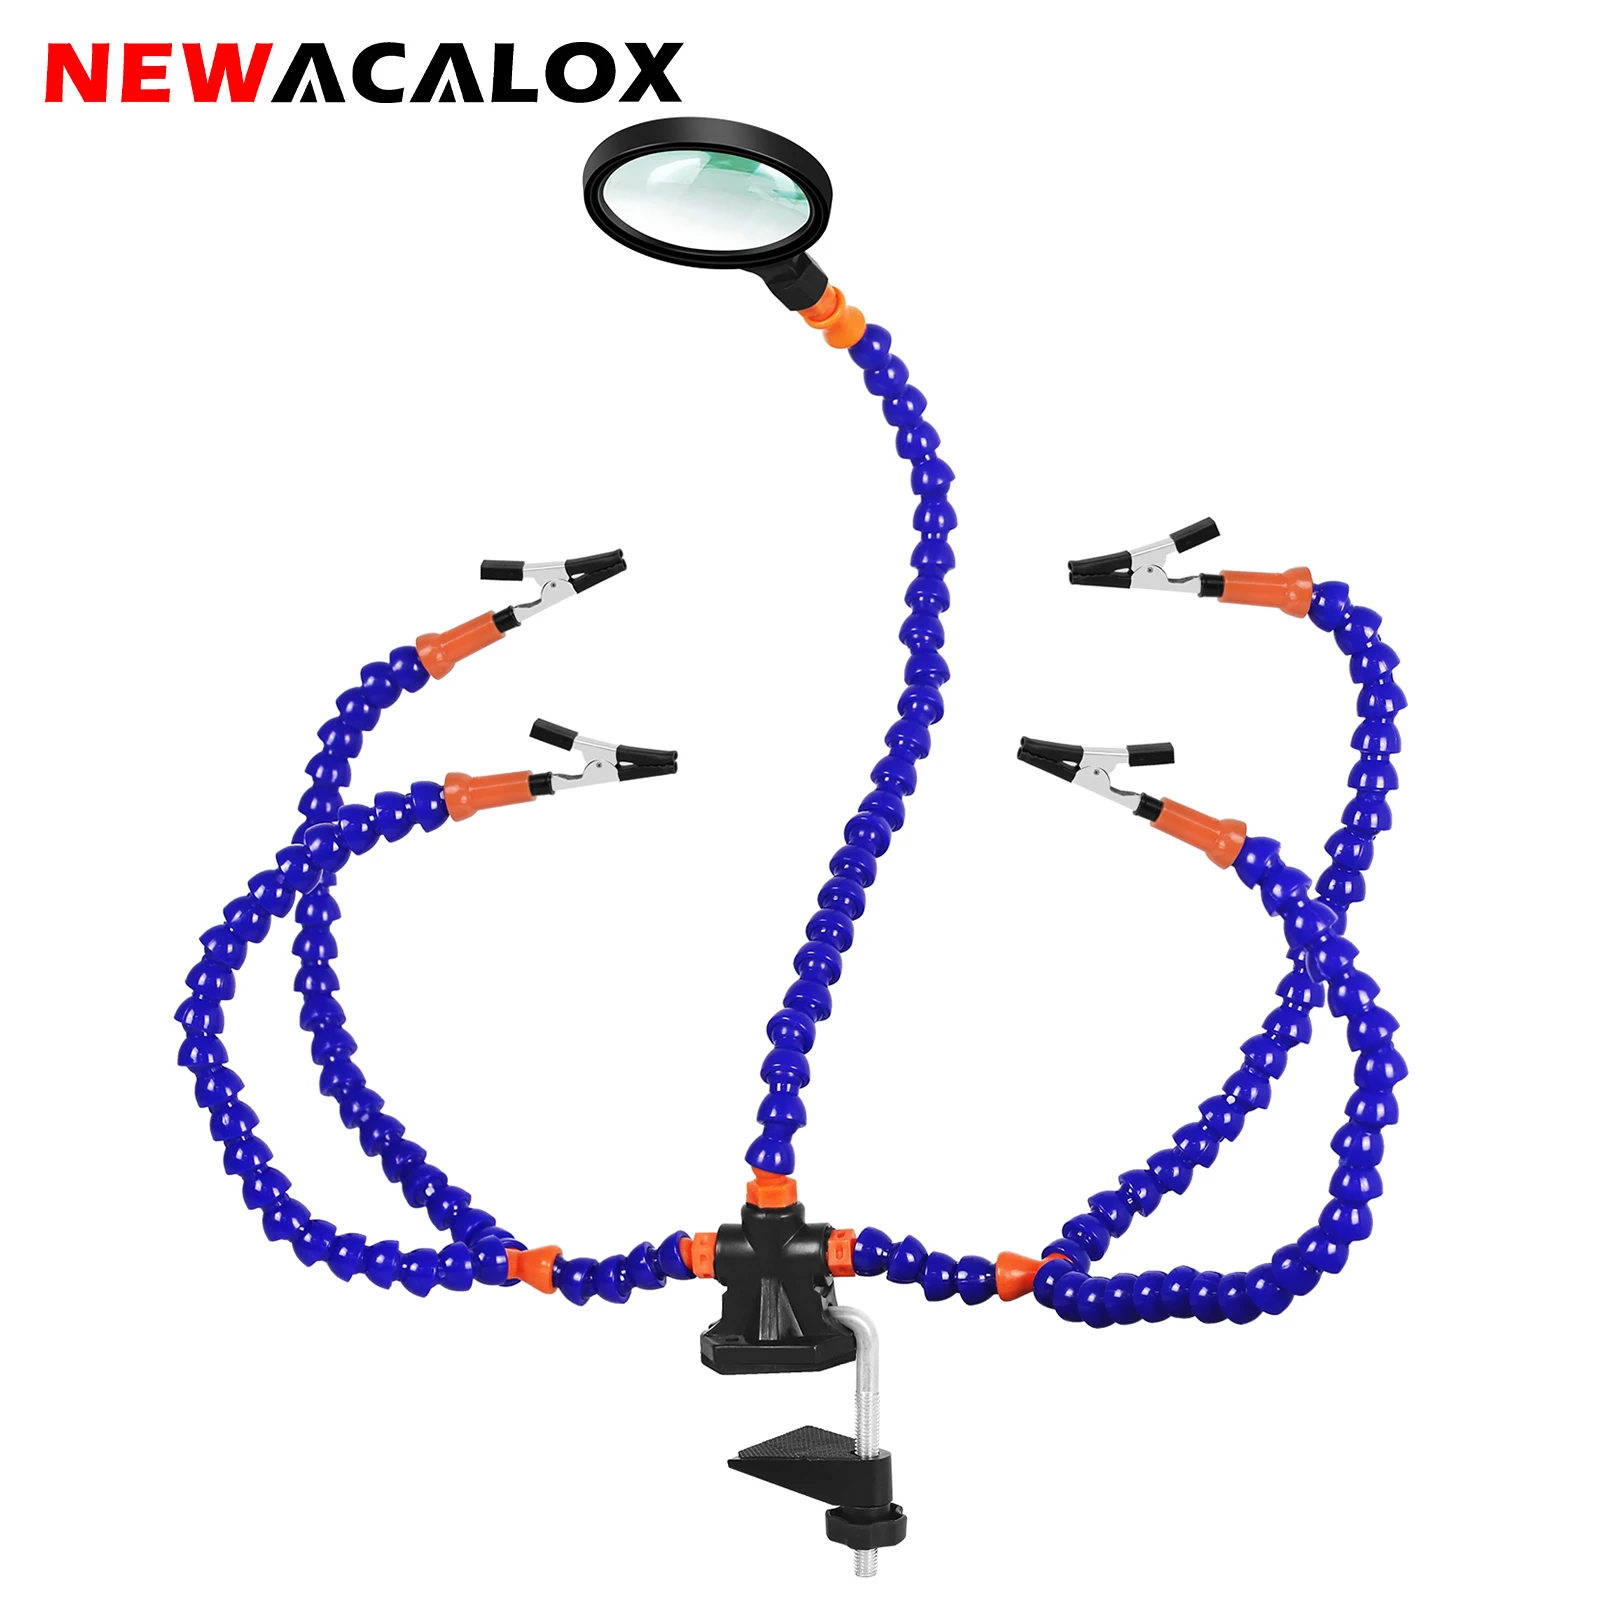 NEWACALOX Soldering Third Helping Hand 3X Magnifier PCB Holder Soldering Station With 5Pcs Flexible Arms Welding Repairing Tool